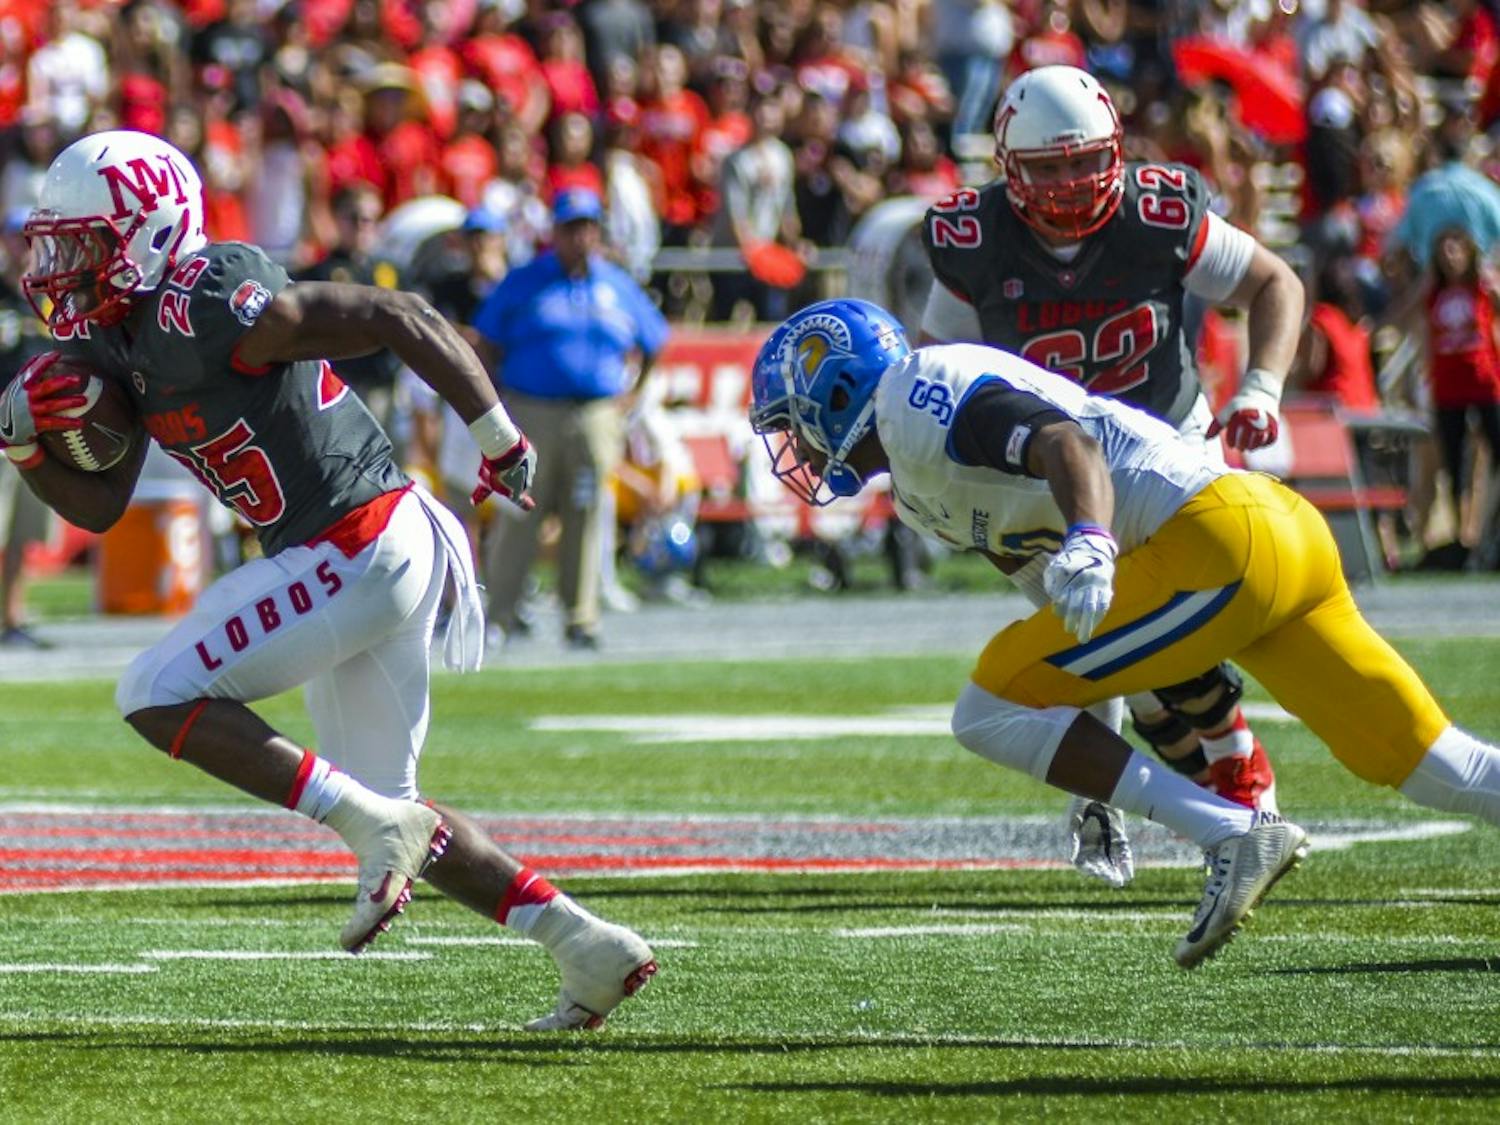 Redshirt sophomore Tyrone Owens outruns a San José State defender on Saturday, Oct. 1, 2016 at University Stadium. The Lobos defeated the San Jose State Spartans 48-41.